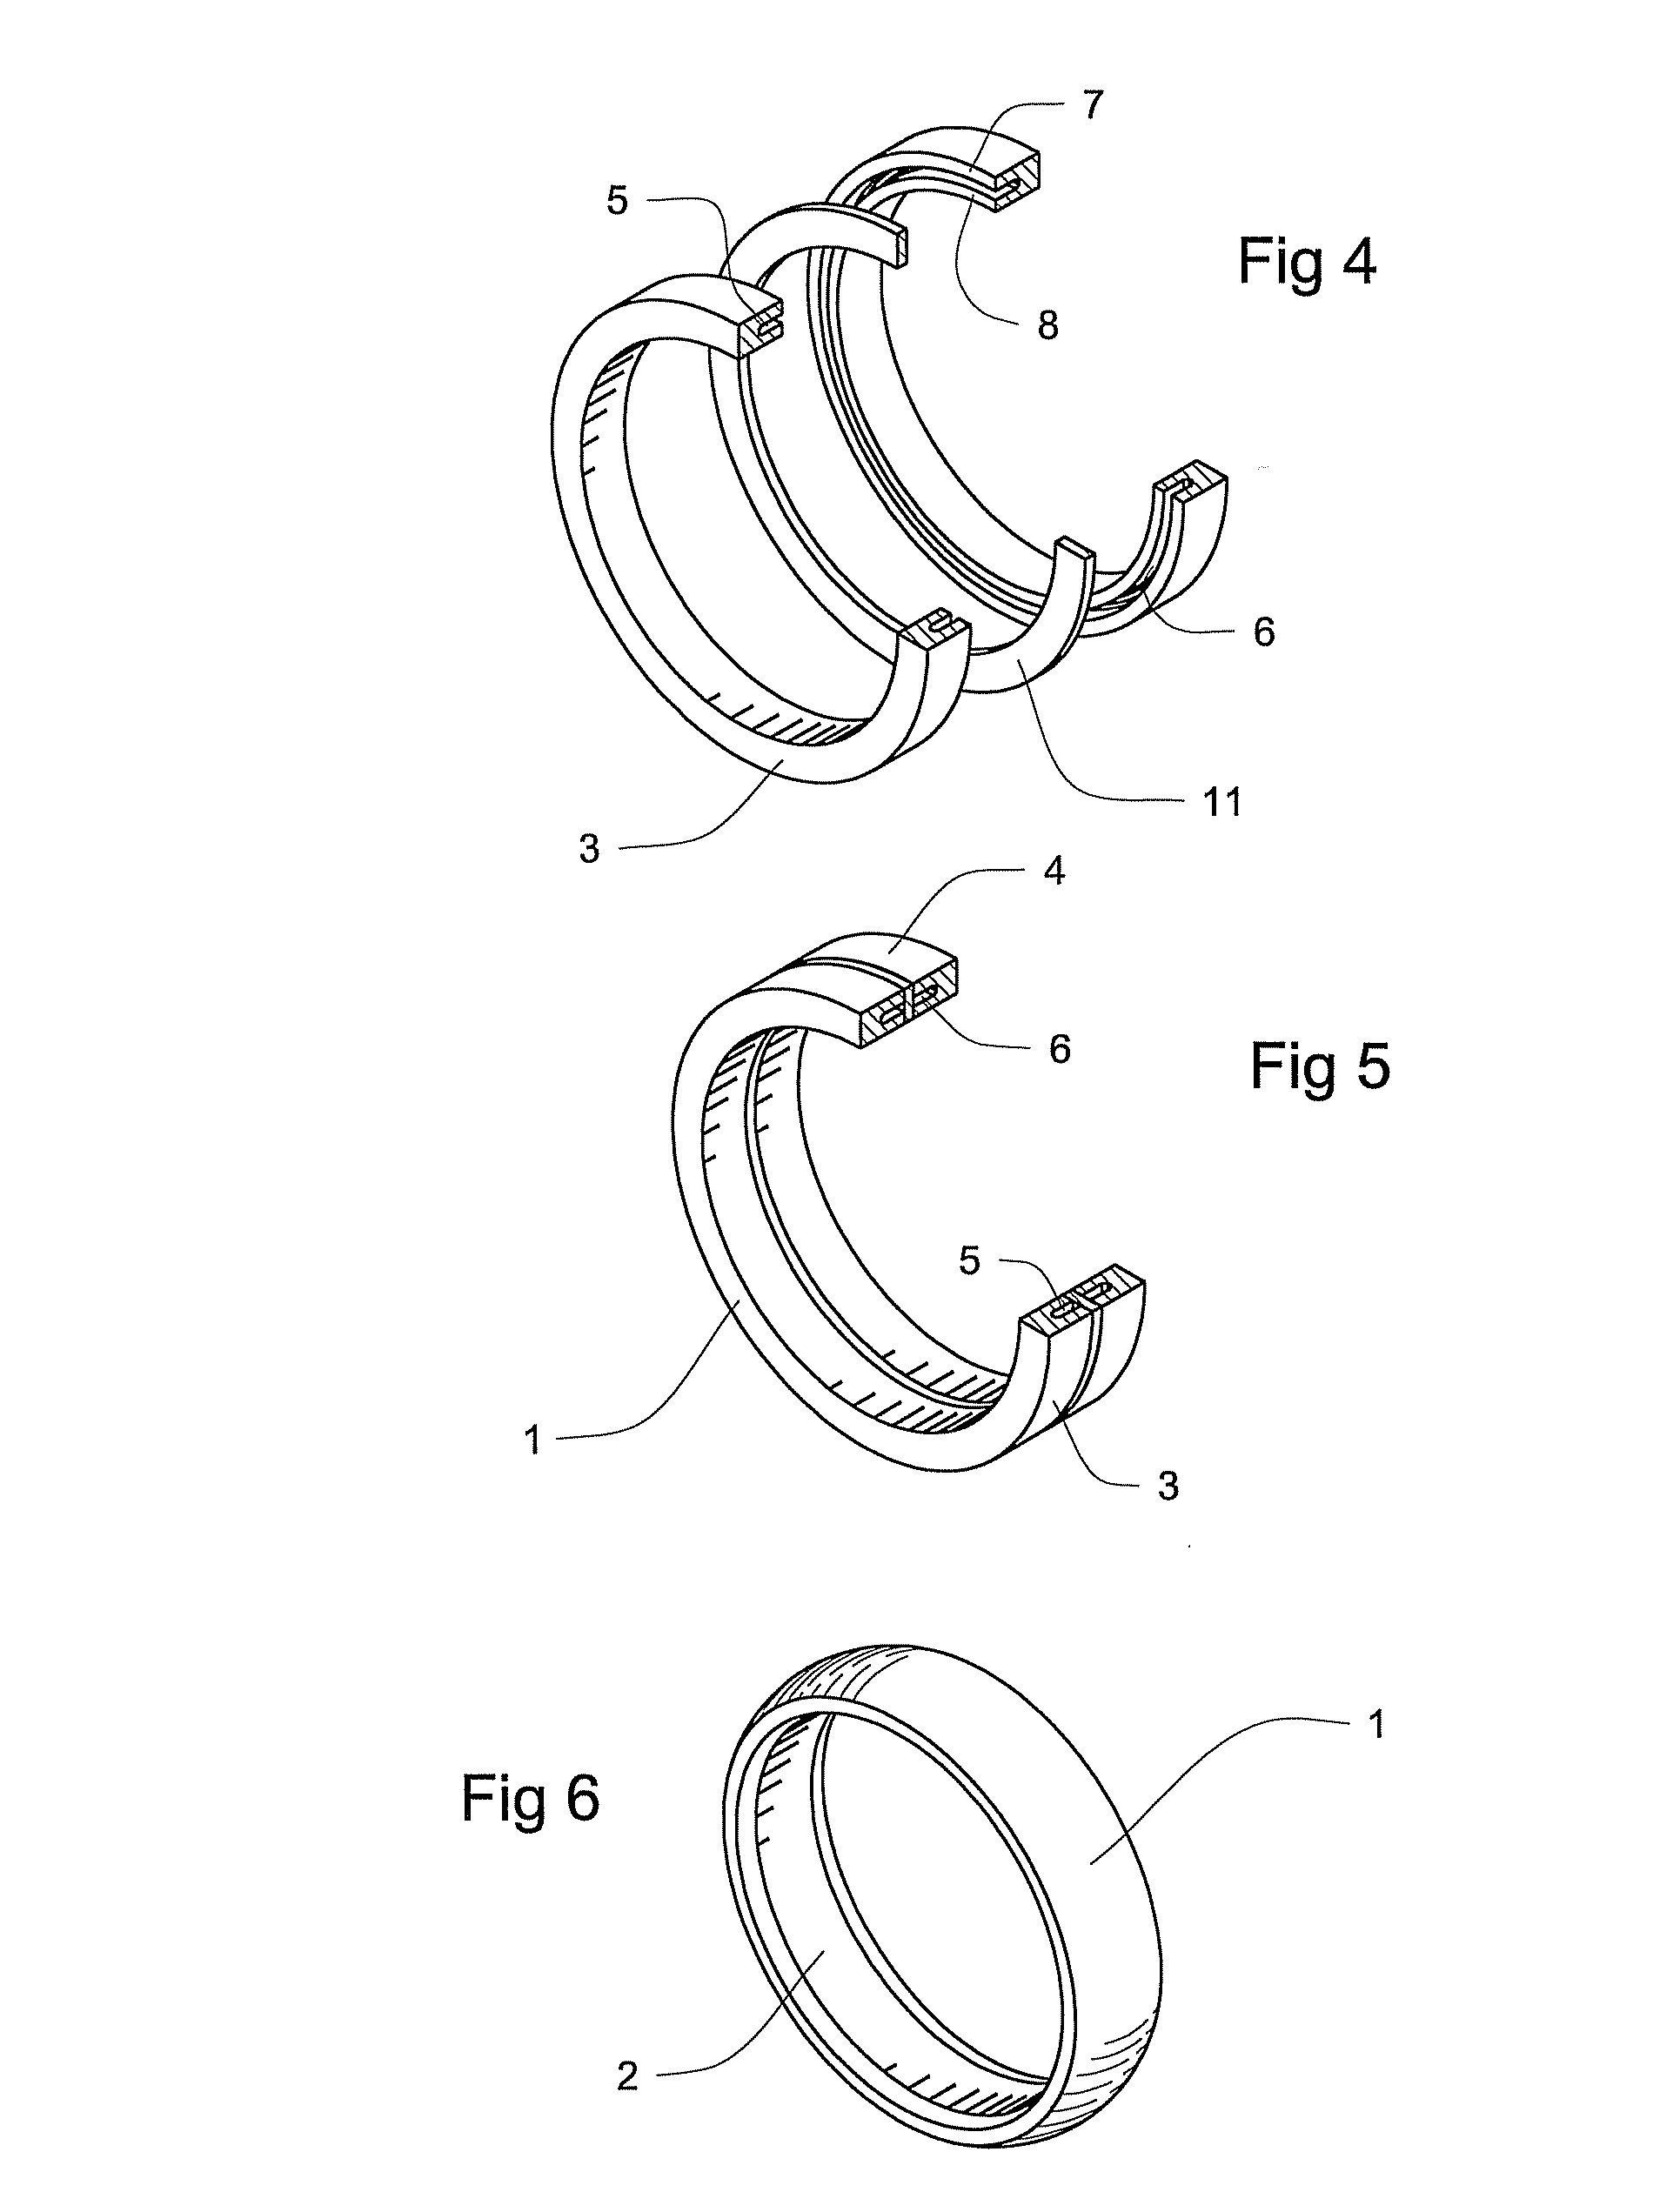 Jewelry Item Having Reduced Weight and Enhanced Strength